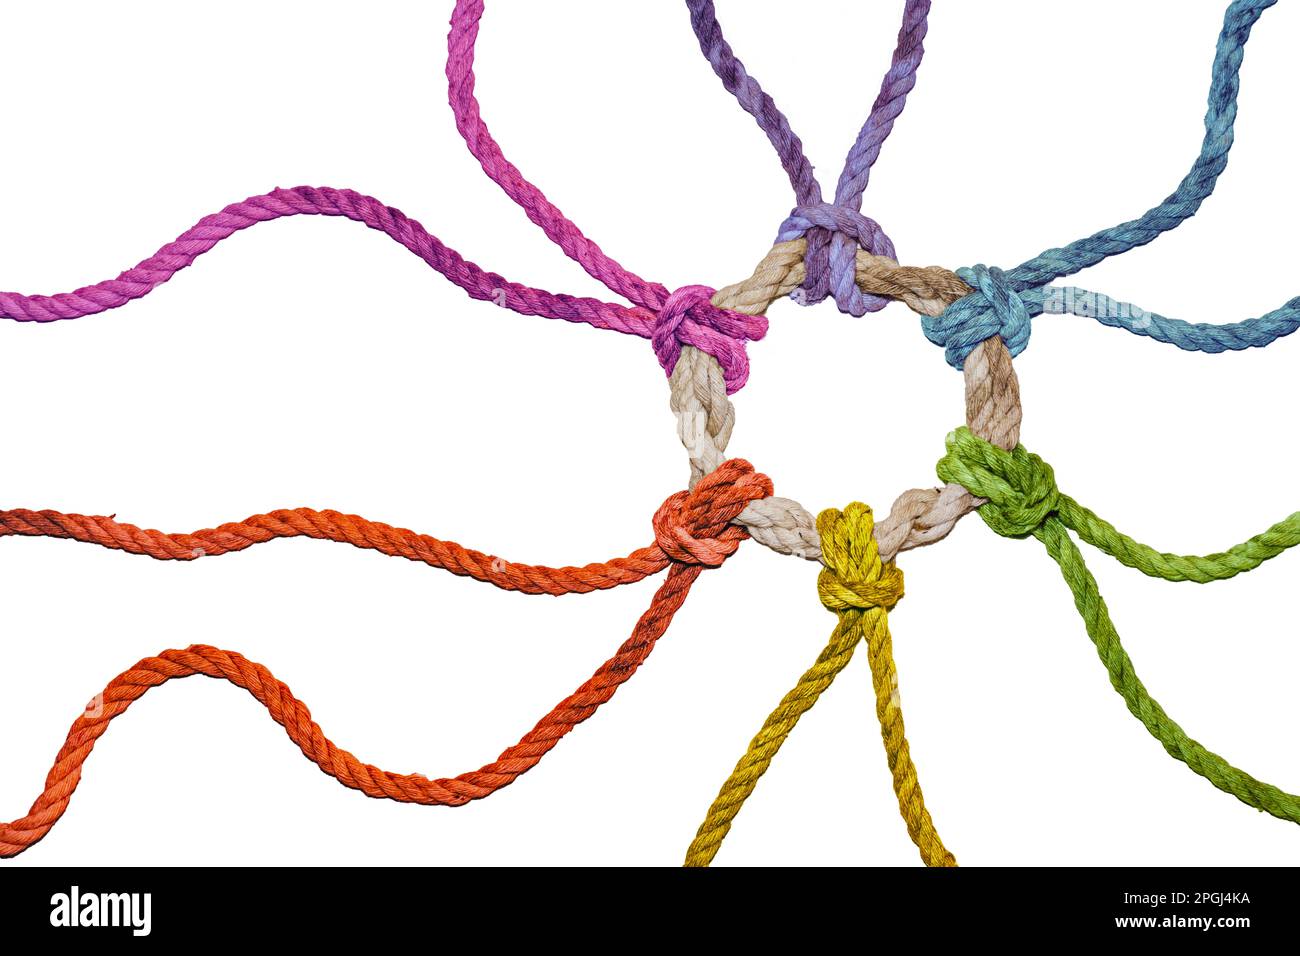 Rustic ropes in rainbow colors from different directions join together in a knotted ring, symbol of diversity, solidarity and cohesion, isolated on a Stock Photo